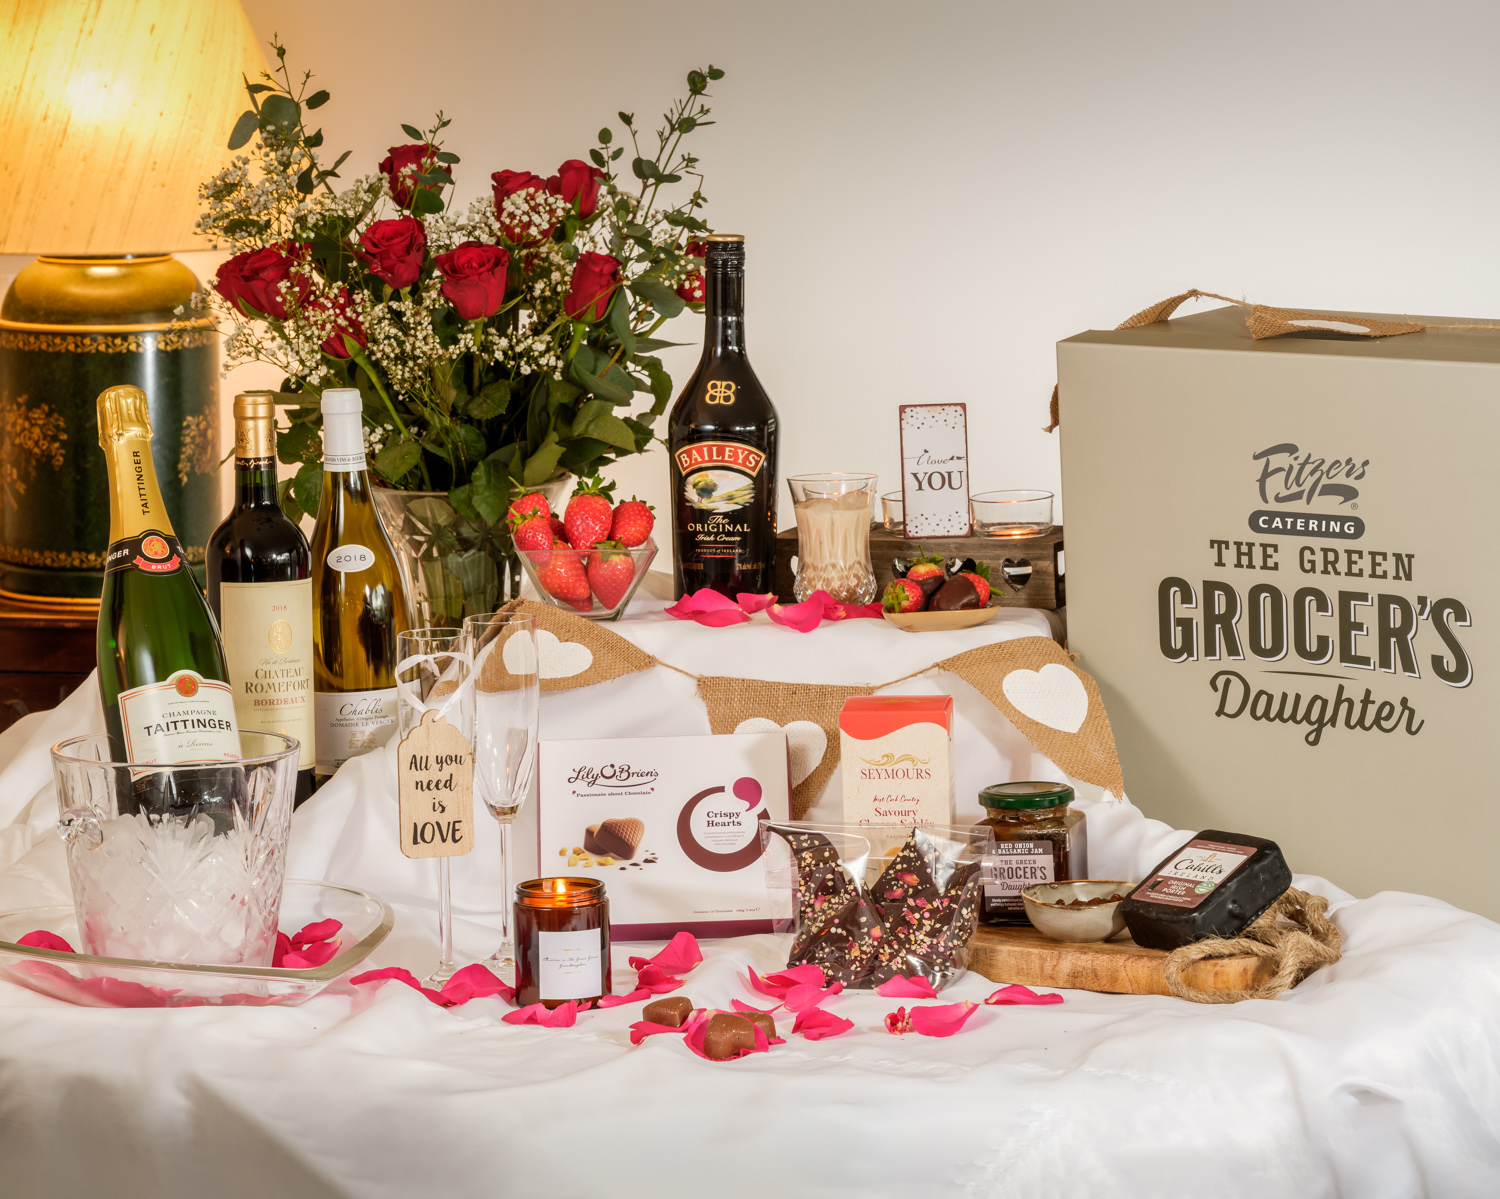 Green Grocer's Daughter Love Is All You Need Luxury Valentine's Hamper €250.00

Available from www.greengrocersdaughter.com call 01-4663005

For further information please contact Mari O'Leary  016789888 / marioleary@olearypr.ie